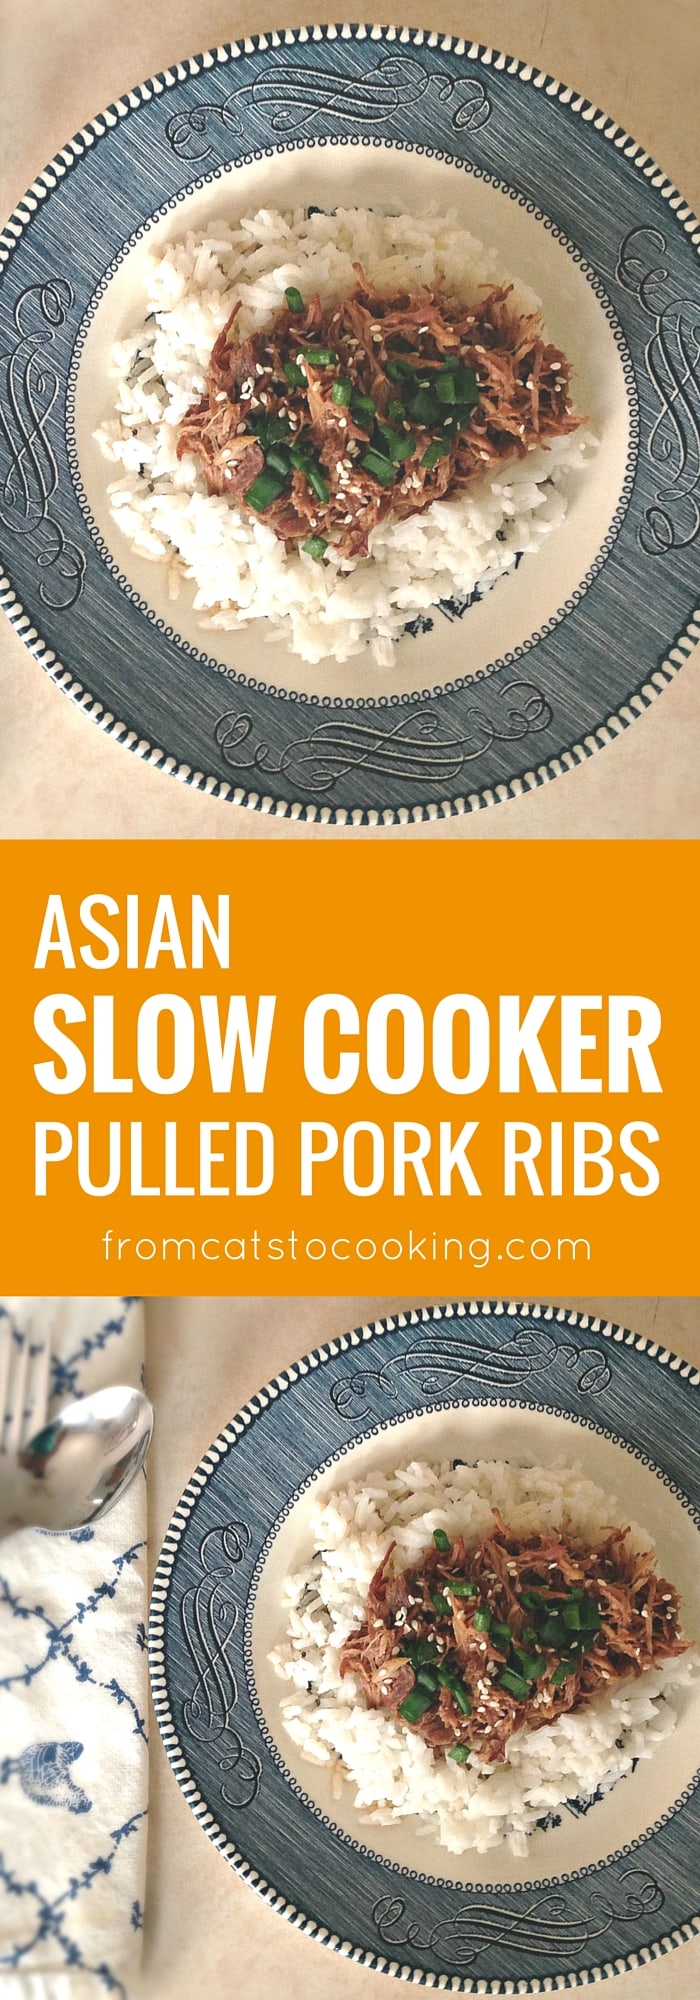 Asian Slow Cooker Pulled Pork Ribs recipe. This is perfect for dinner and makes awesome leftovers for lunch the next day. Is gluten-free and paleo as well!